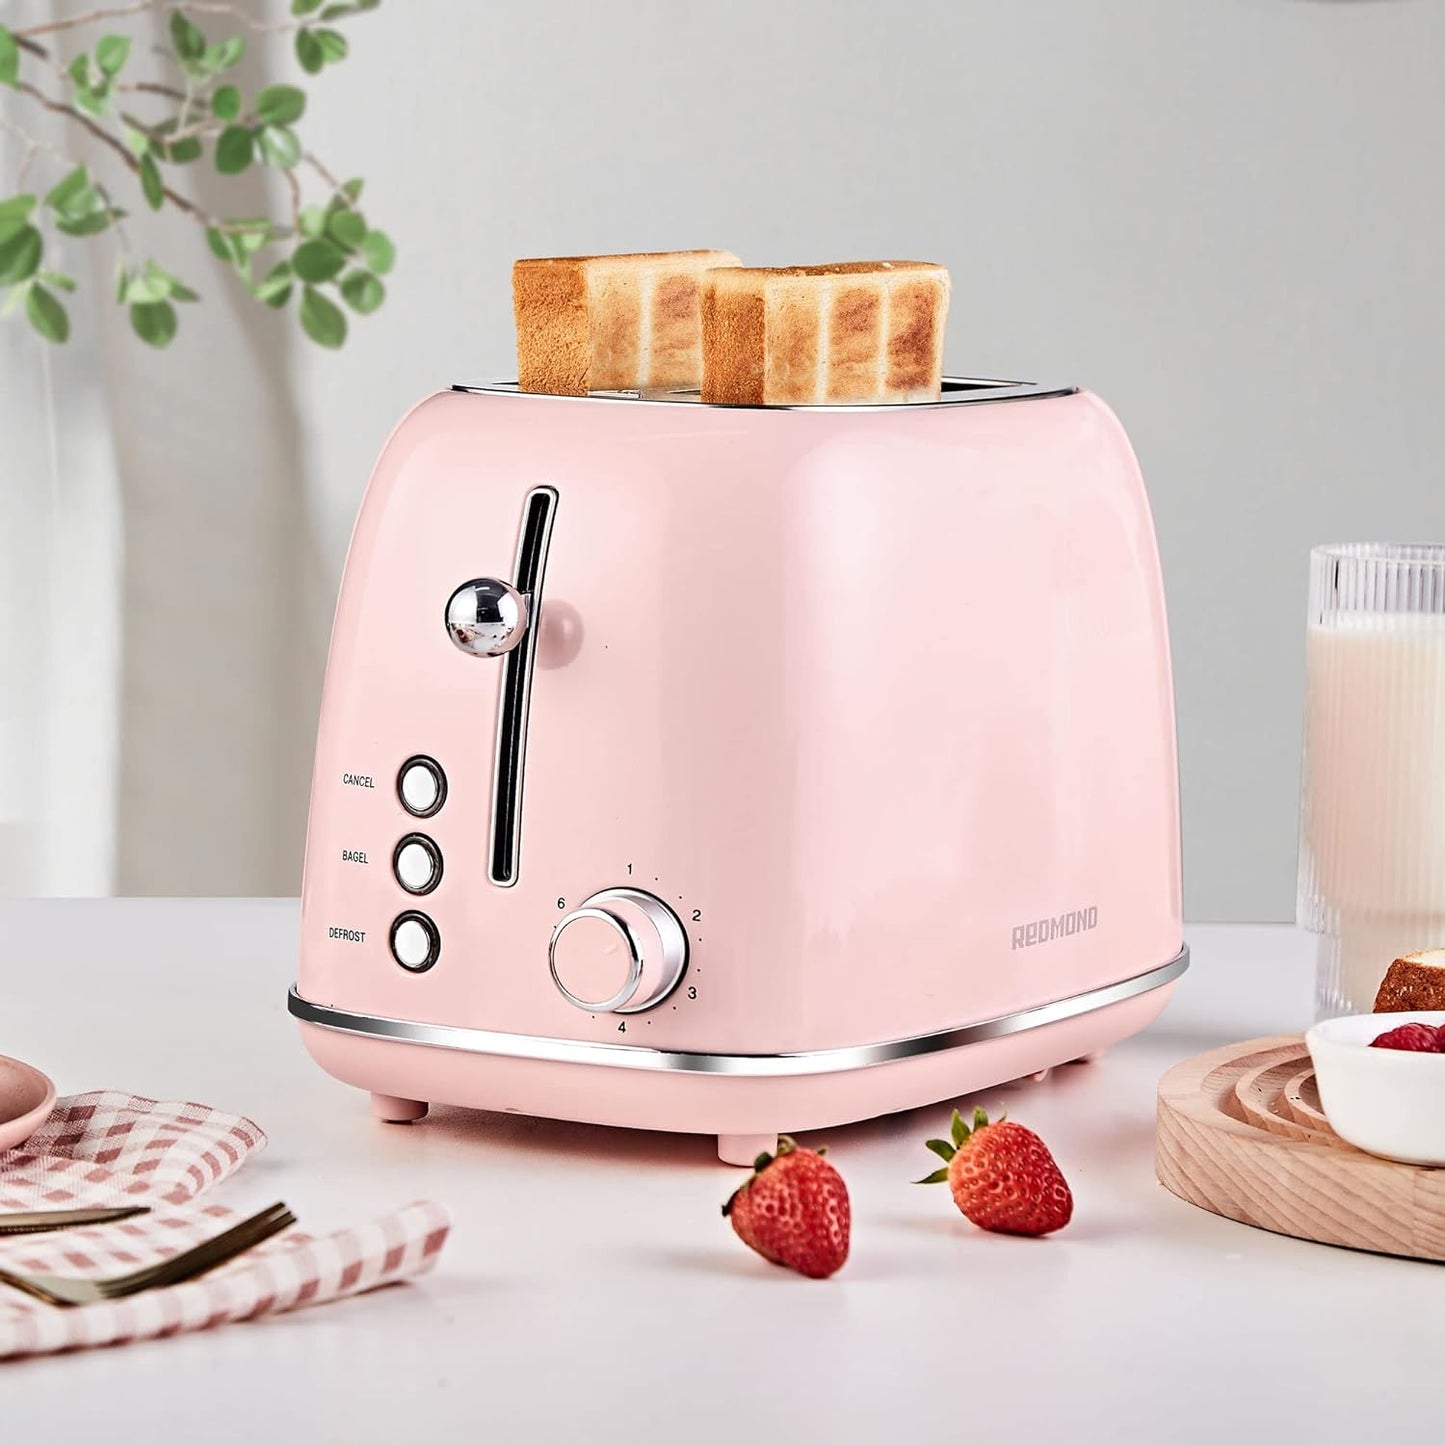 2 Slice Retro Stainless Steel Toaster with Bagel, Cancel, Defrost Function and 6 Bread Shade Settings , Extra Wide Slot and Removable Crumb Tray, Pink, ST028